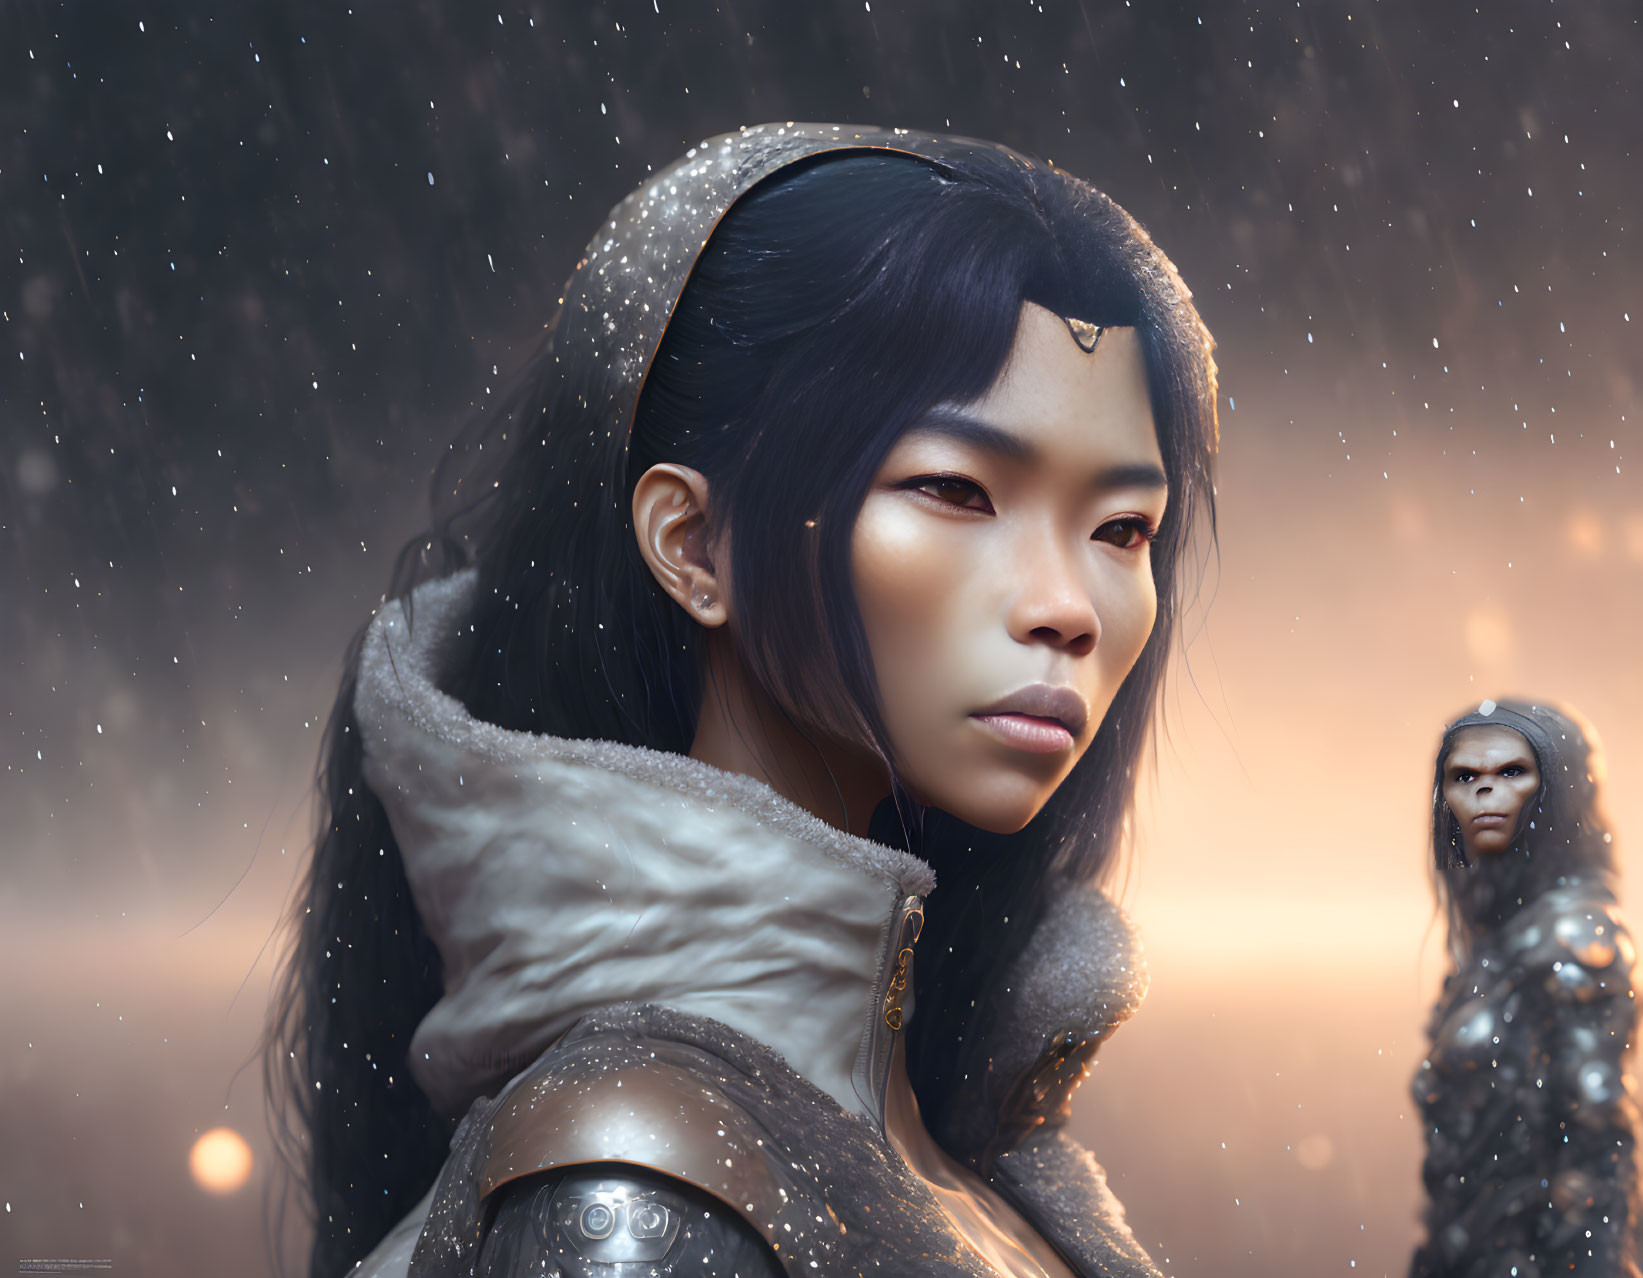 Digital Artwork: Asian Woman in Fur-lined Hood with Snowfall Background and Mystical Creature